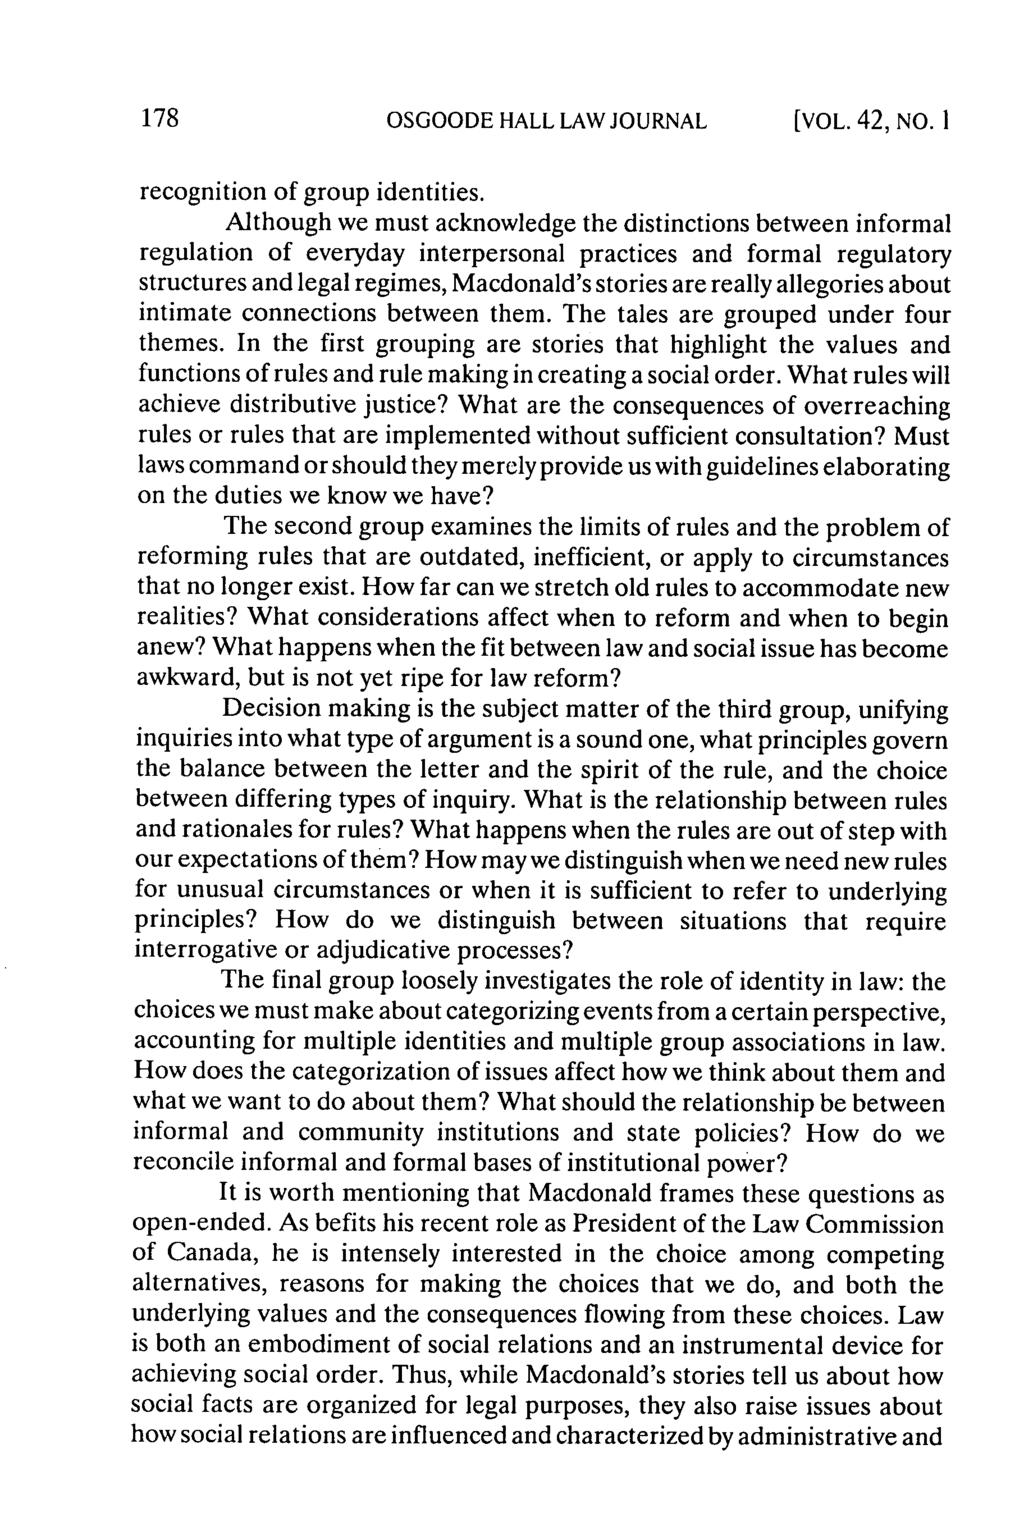 OSGOODE HALL LAW JOURNAL [VOL. 42, NO. I recognition of group identities.